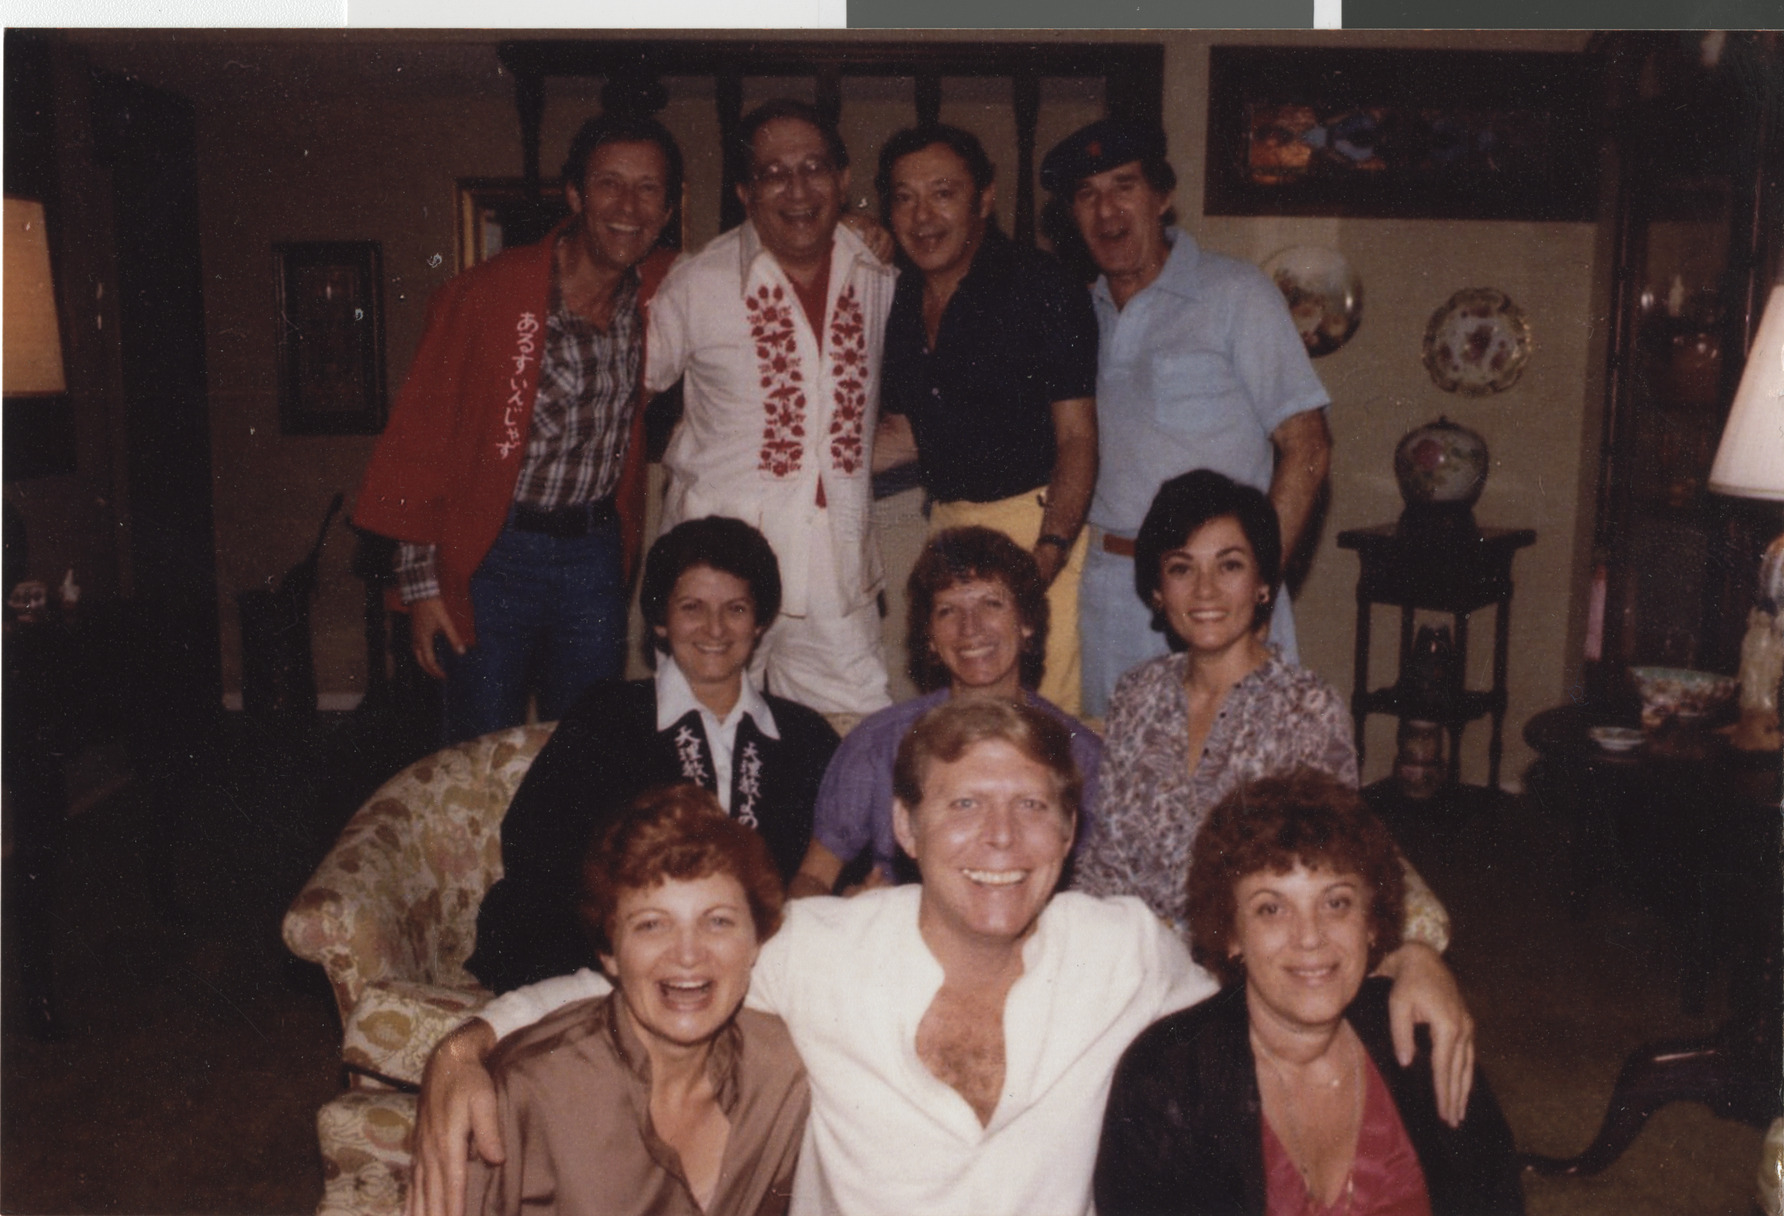 Photograph of Stuart Mason (front center) and Flora Mason (second row, right) with a group, circa 1975